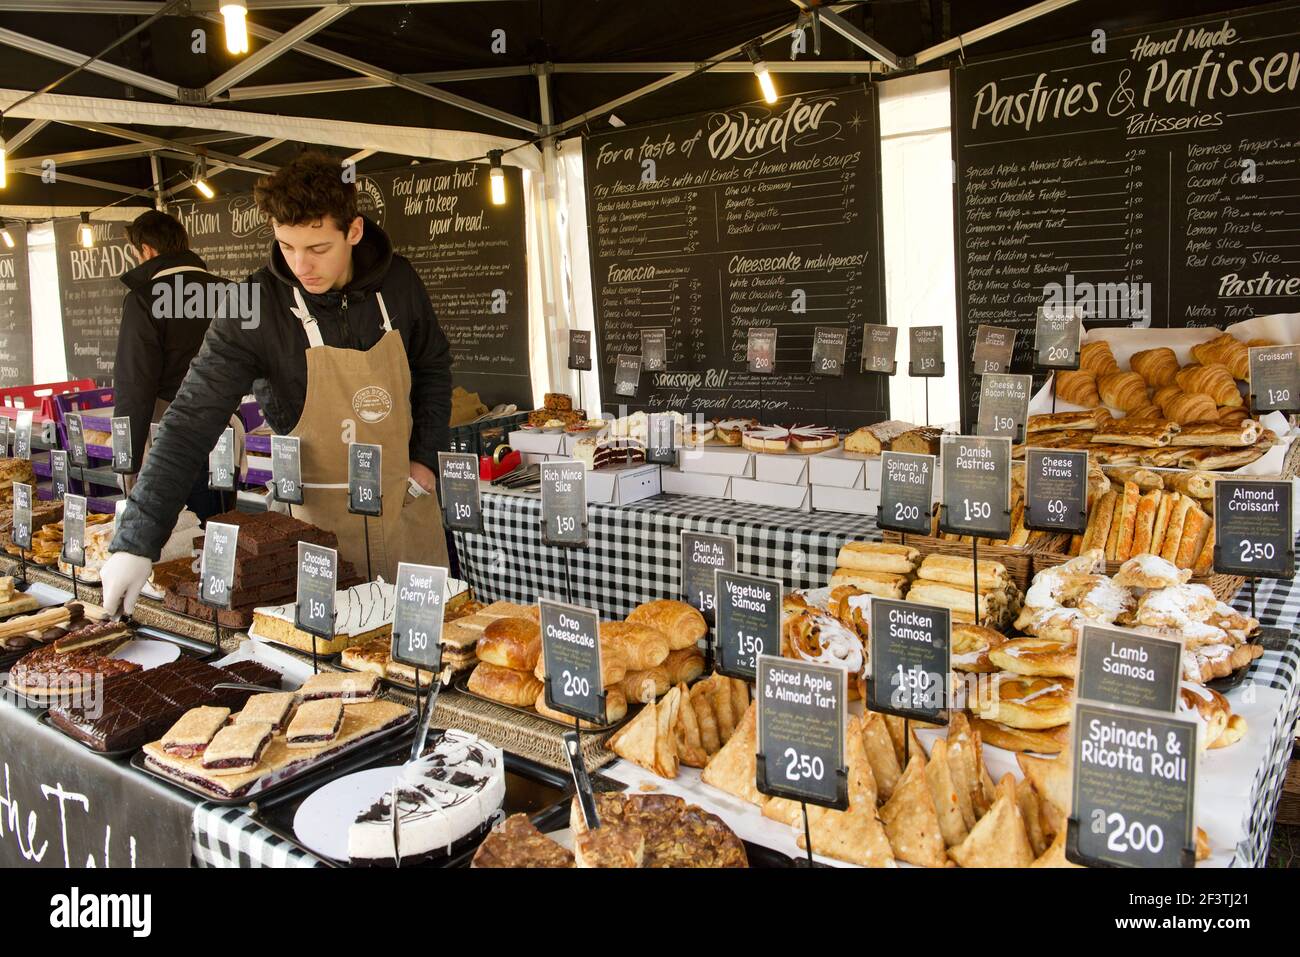 Pastries and Patisseries at Farmers Market Stock Photo